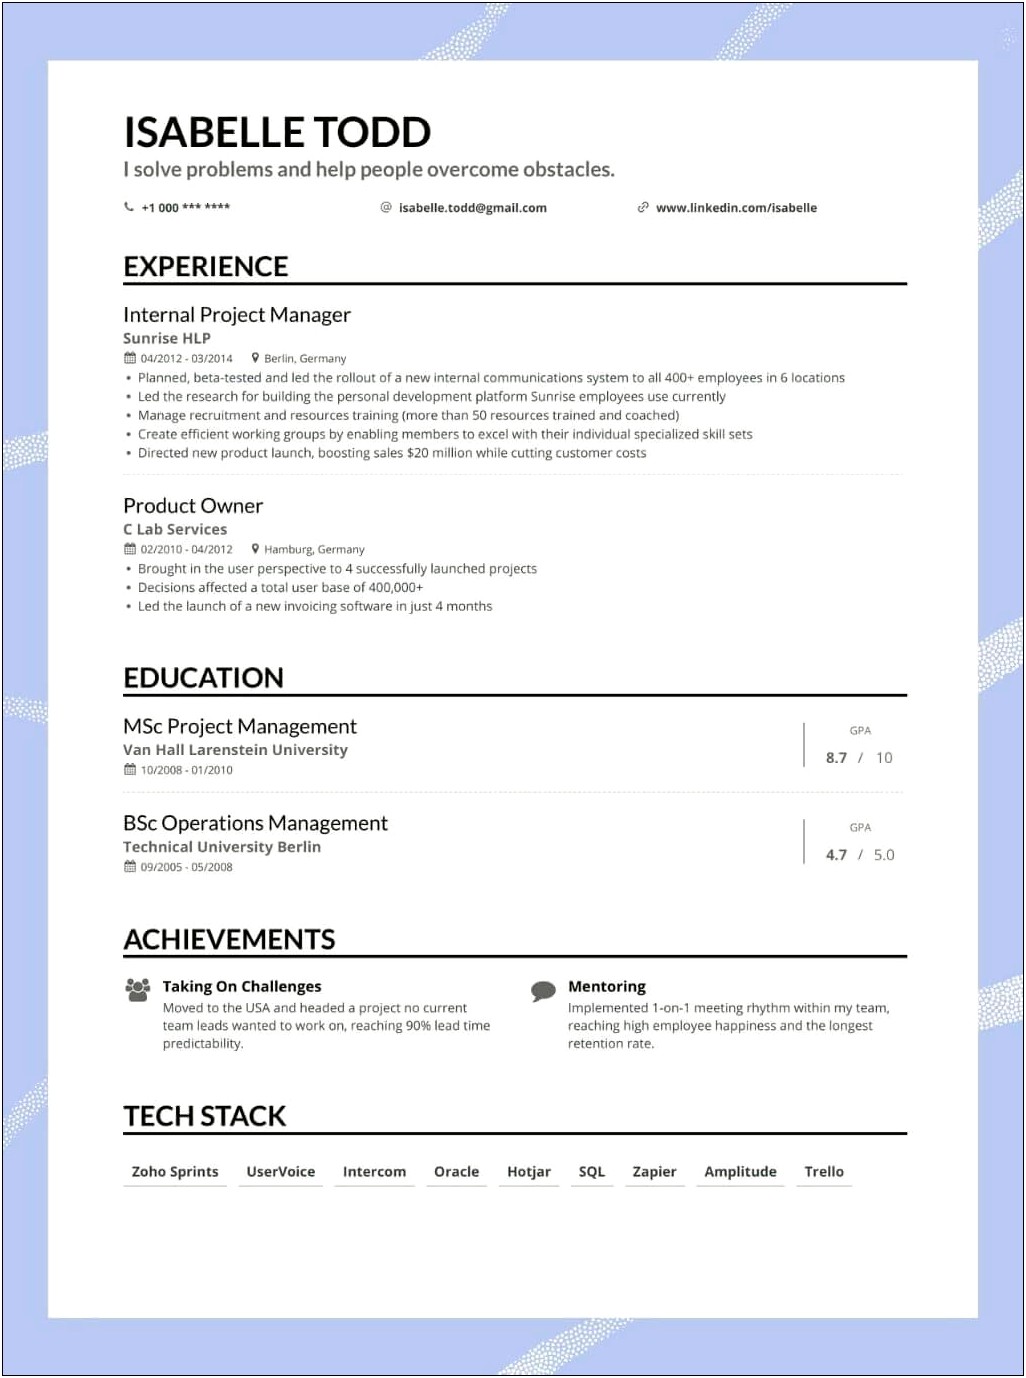 Resume Reverse Chronological Formatting Examples